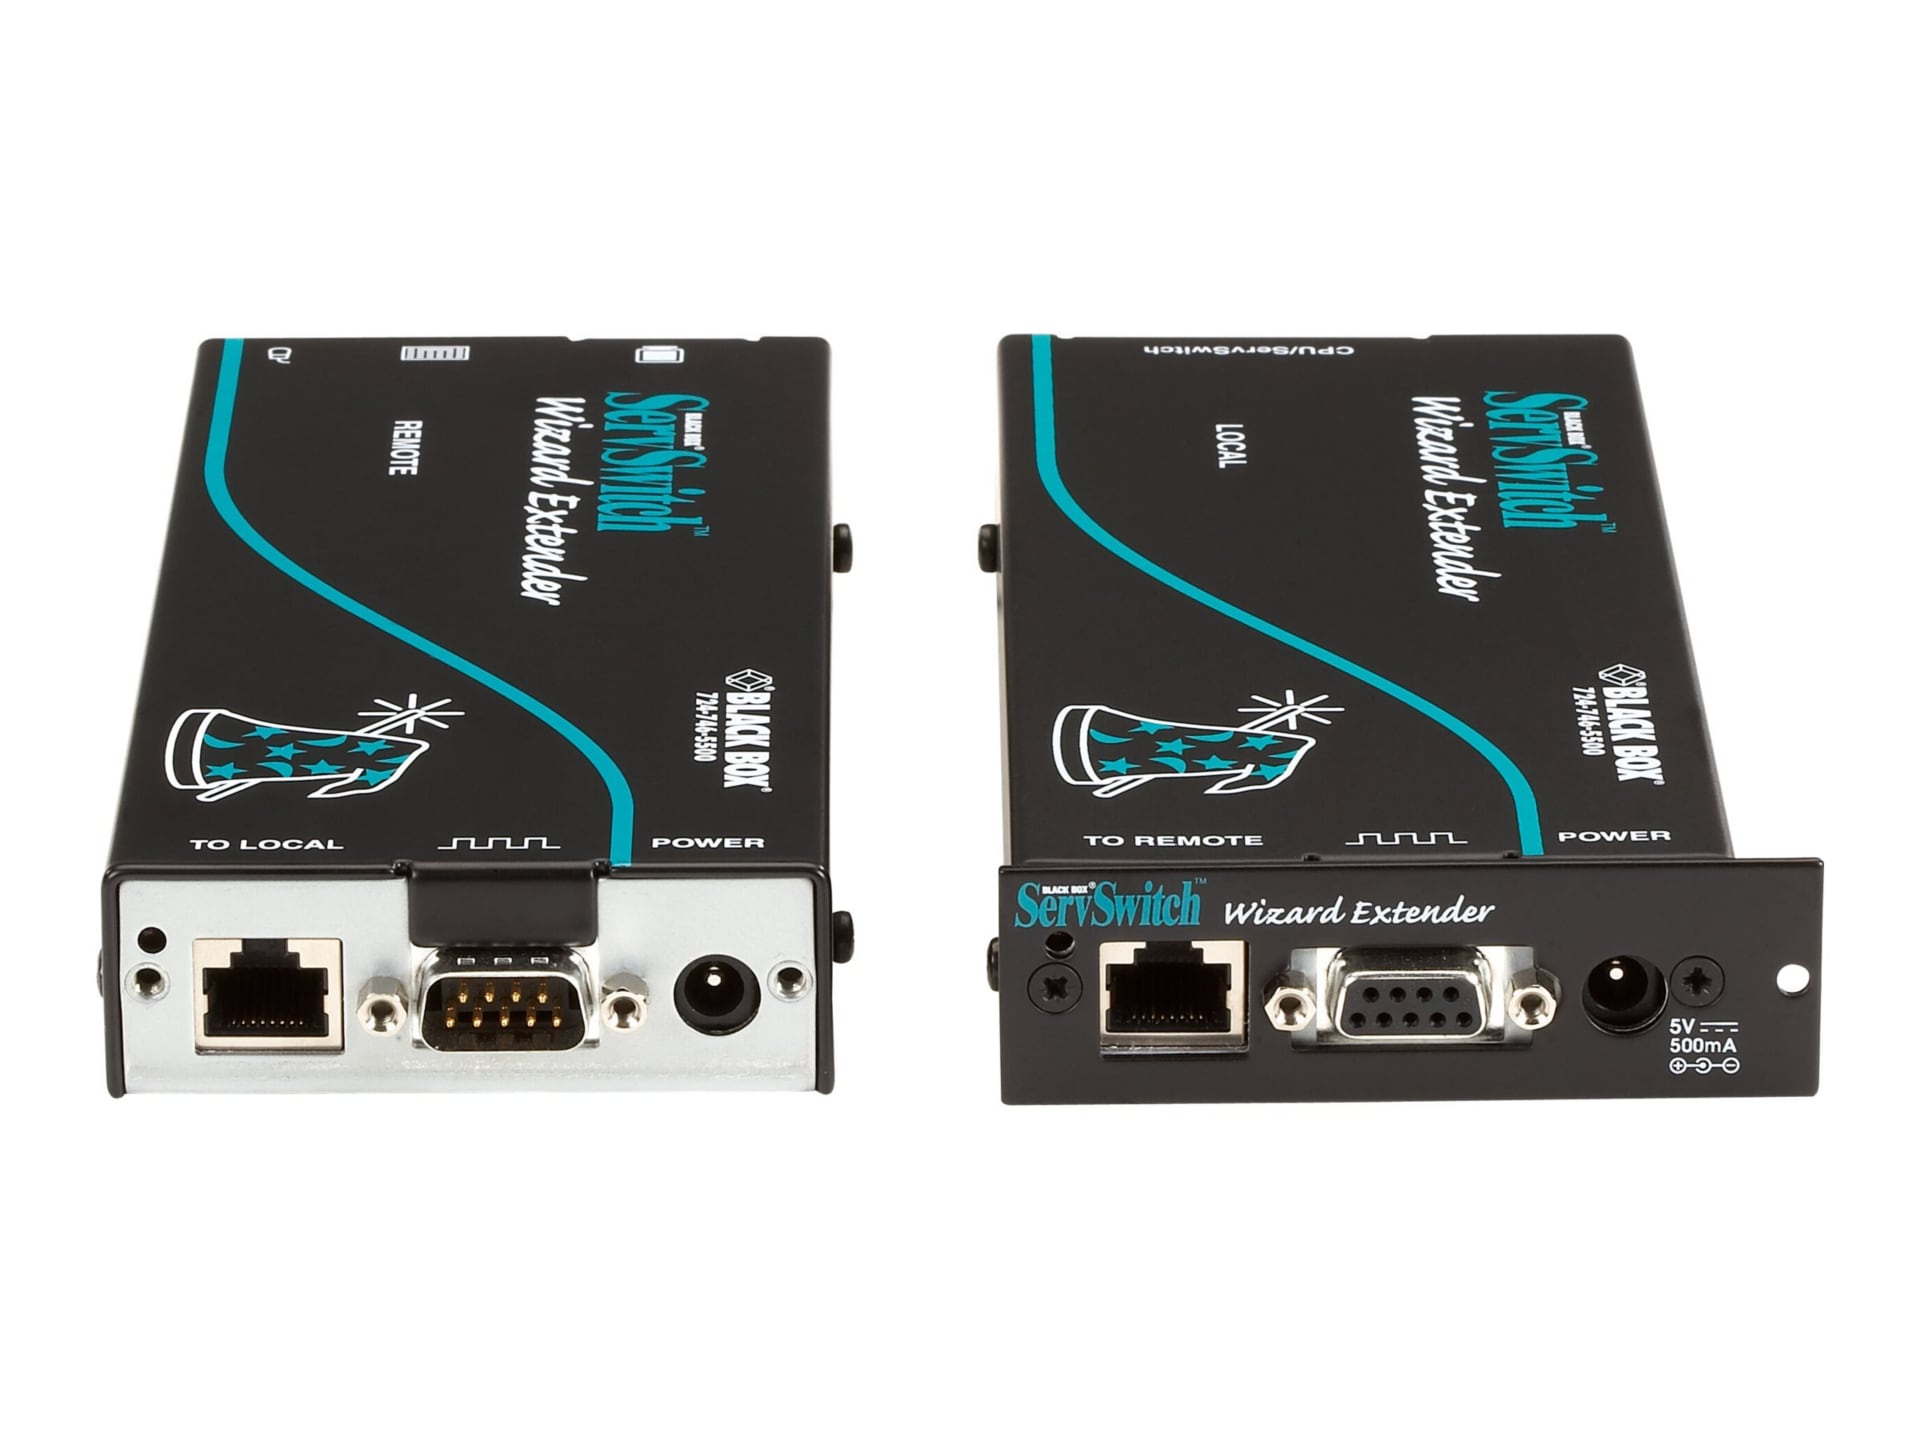 Black Box ServSwitch Wizard Extender Single-Access Serial Kit with Skew Compensation - KVM extender